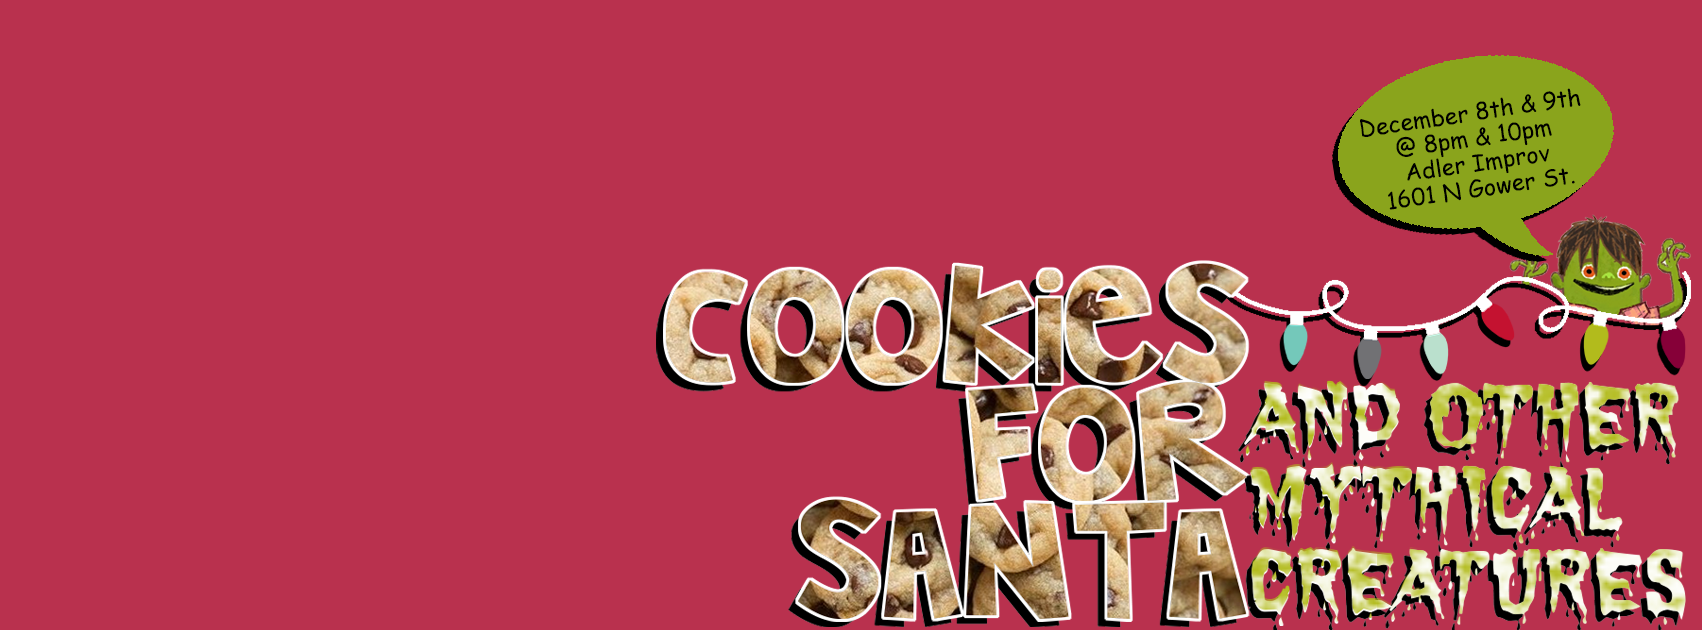 Cookies for Santa and other Mythical Creatures